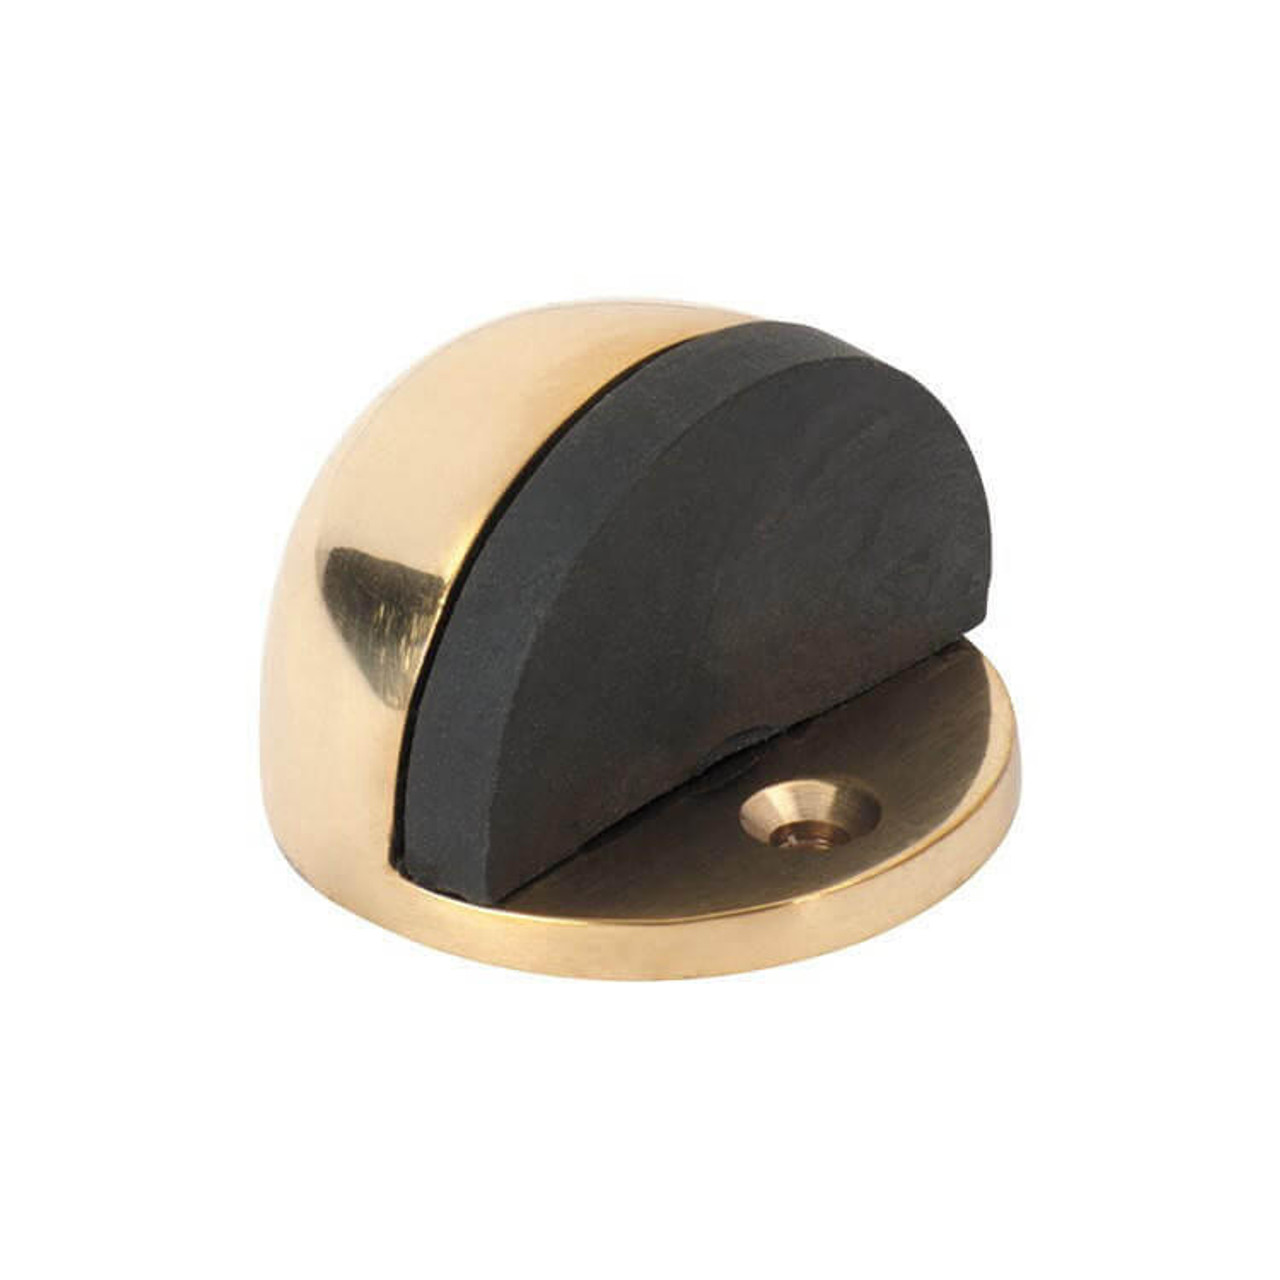  Tradco Oval Door Stop Polished Brass - 1512 